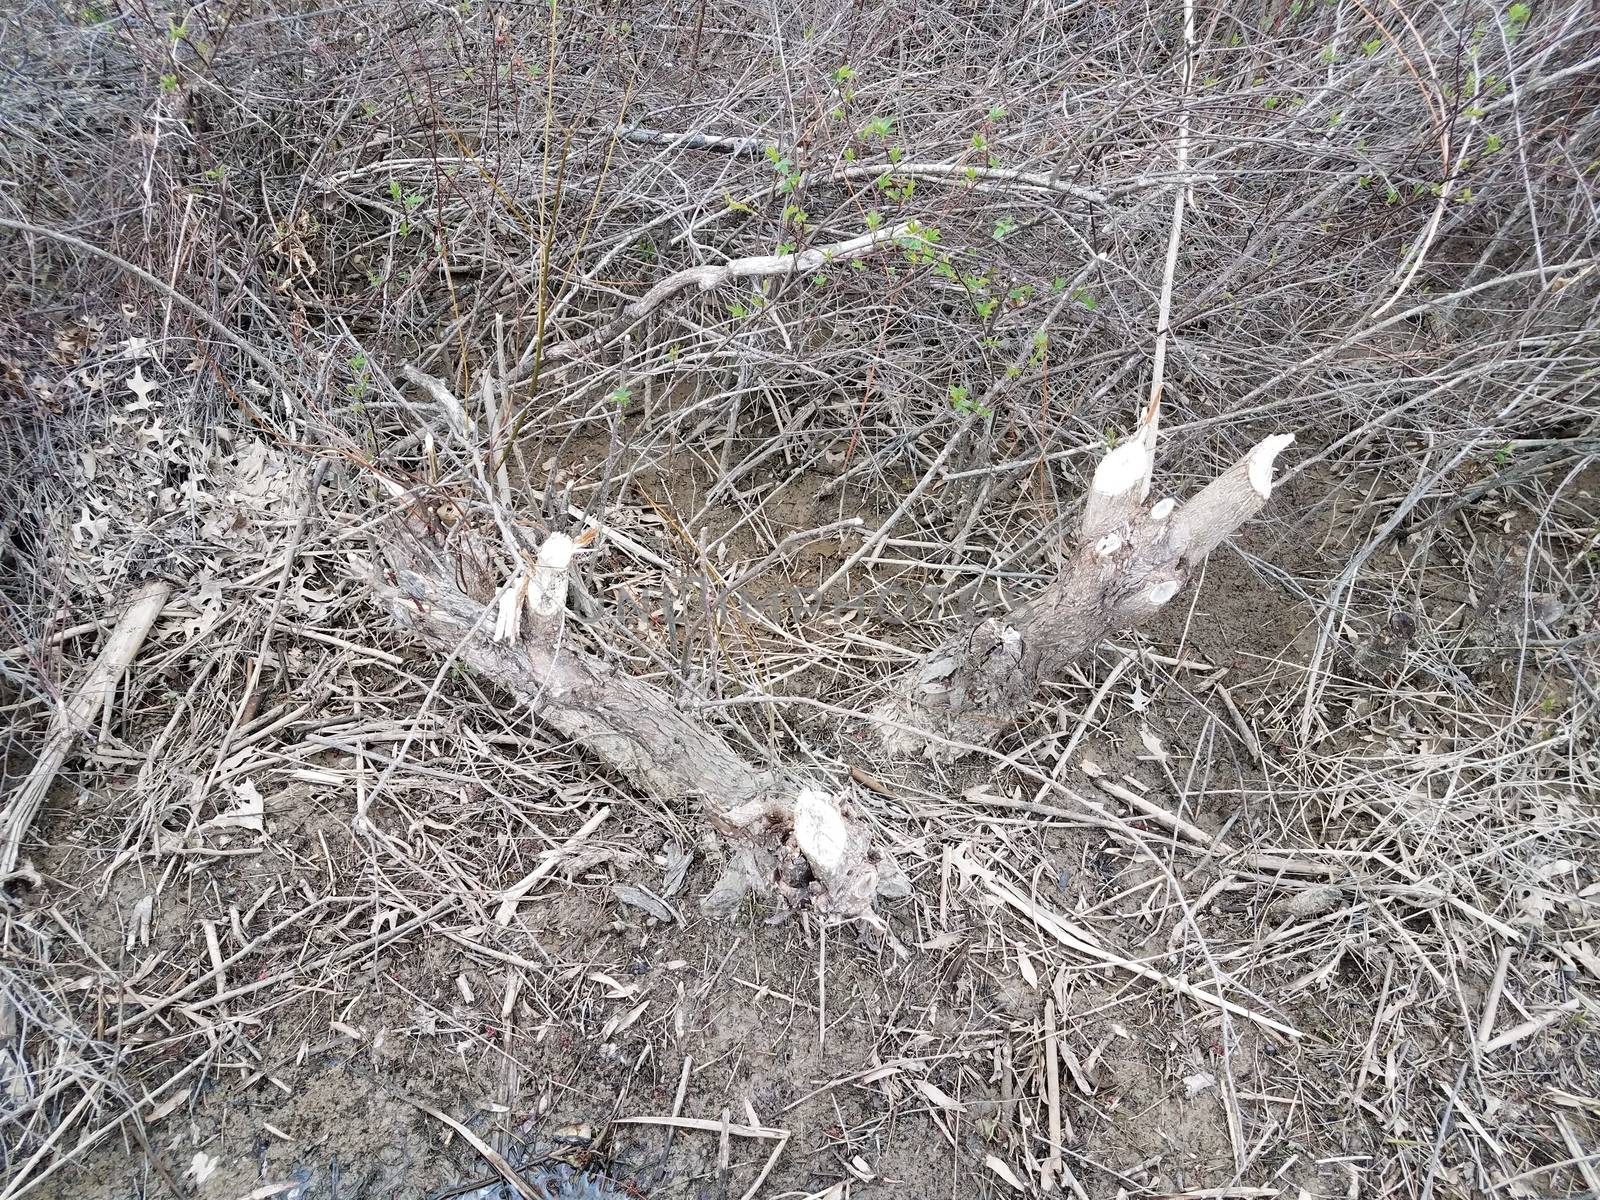 branches or twigs in muddy swamp or wetland area chewed or bitten by beavers